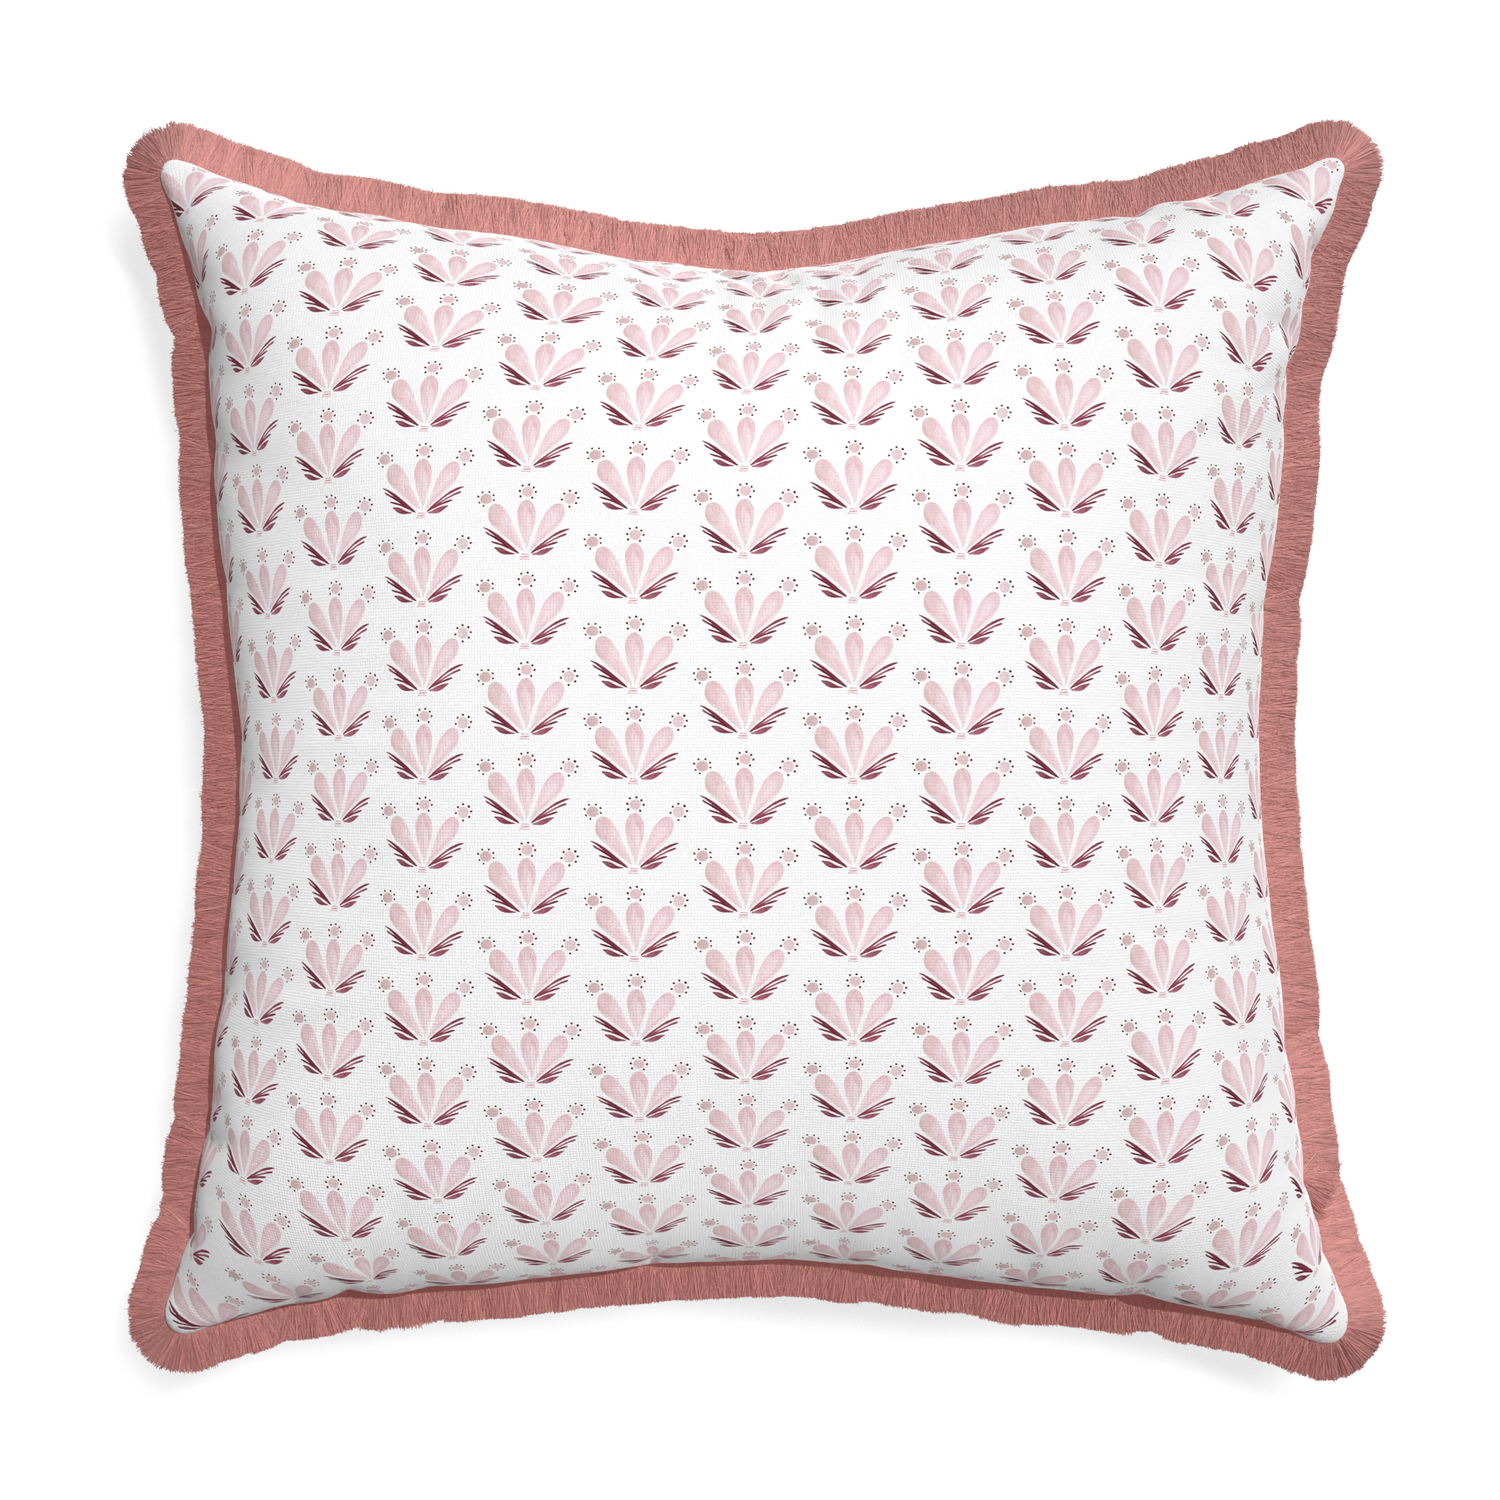 Euro-sham serena pink custom pink & burgundy drop repeat floralpillow with d fringe on white background